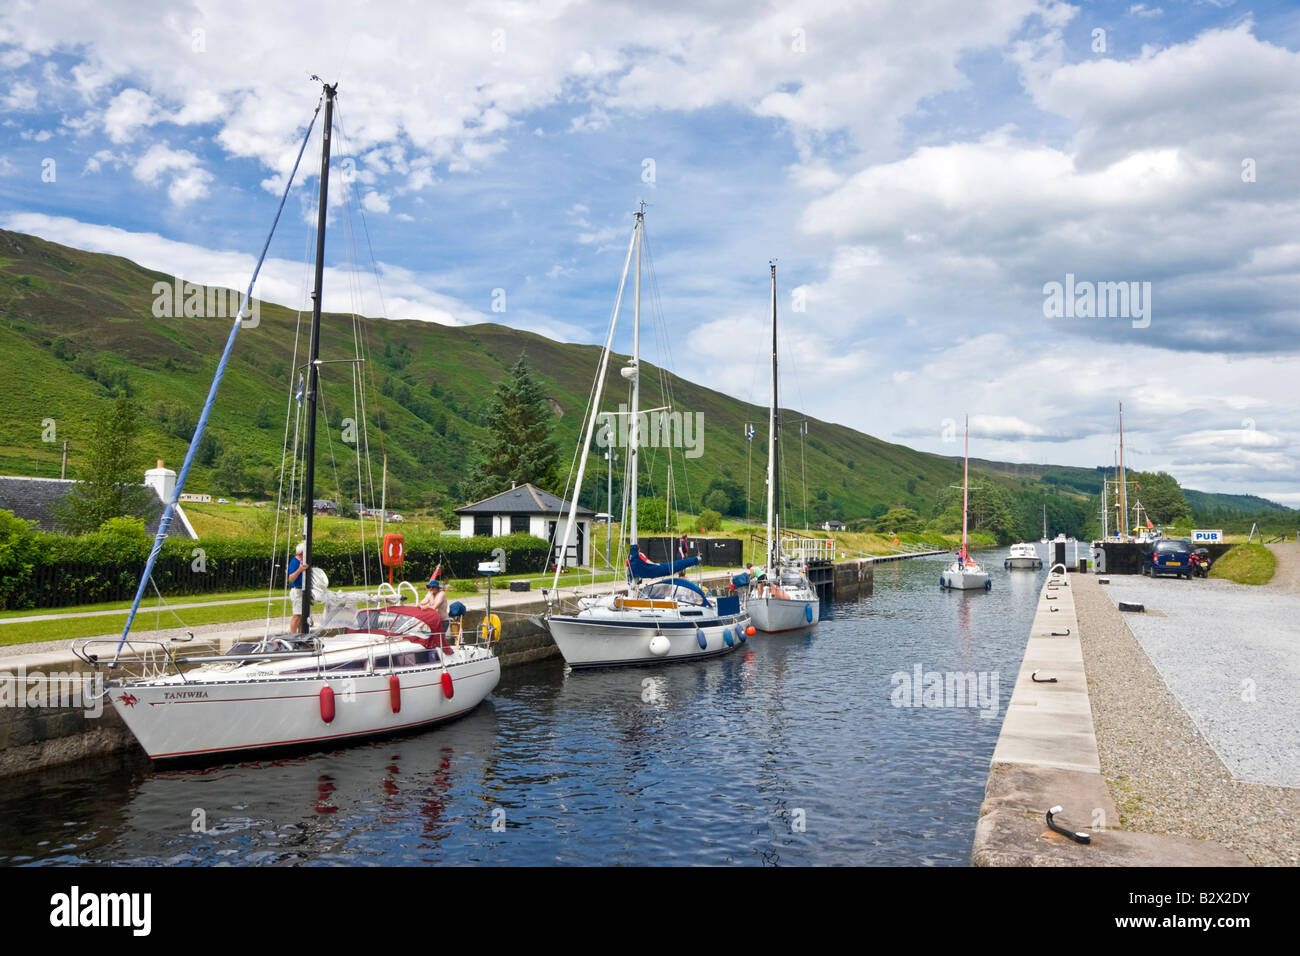 Sailing and motor boats in the process of entering the Loch Lochy Laggan locks on the Caledonian Canal in the Scottish Highlands Stock Photo